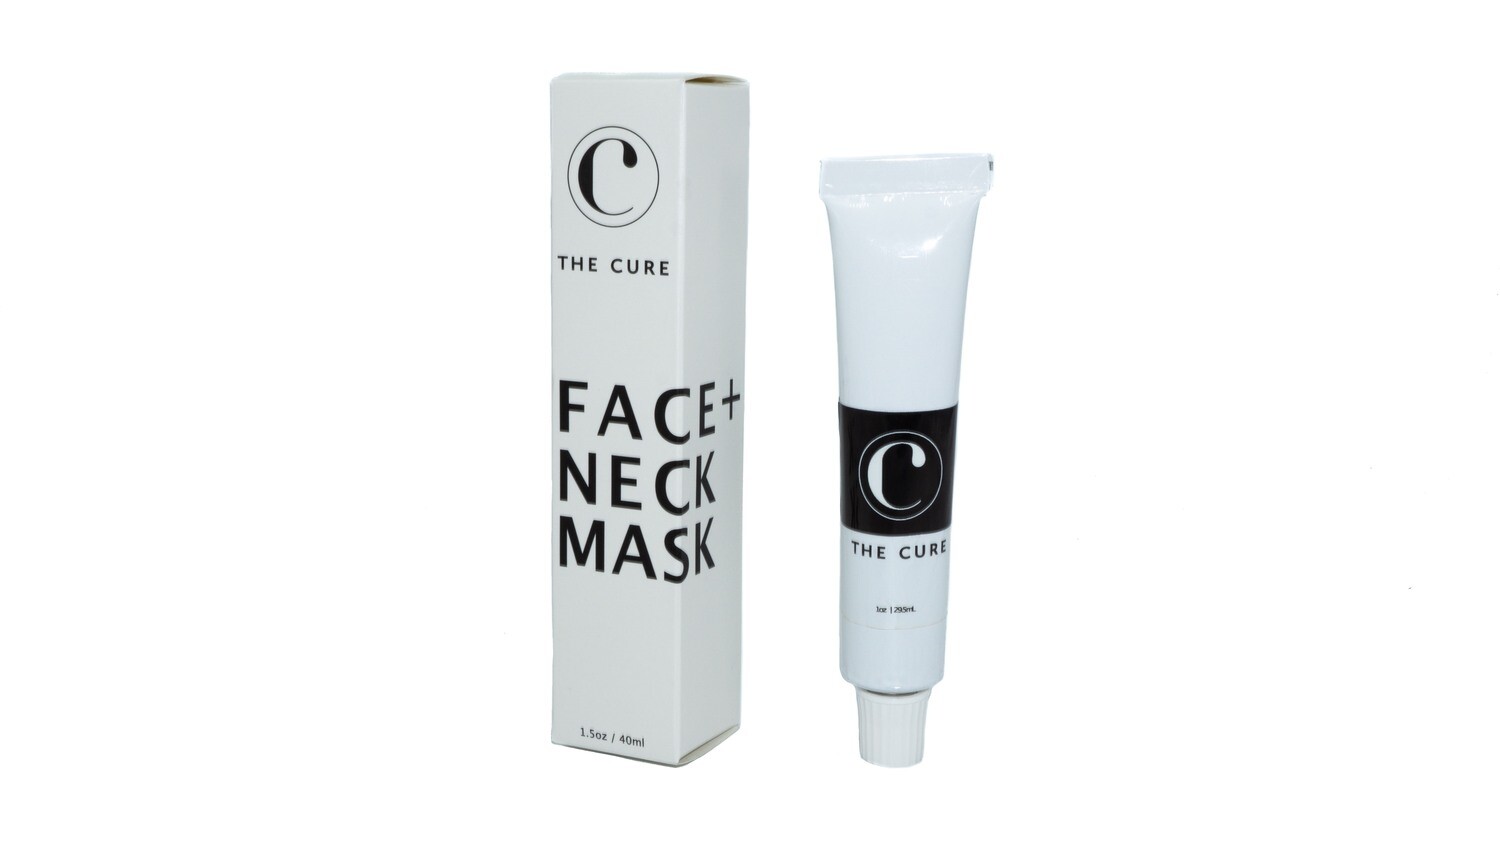 Face & Neck Mask by The Cure